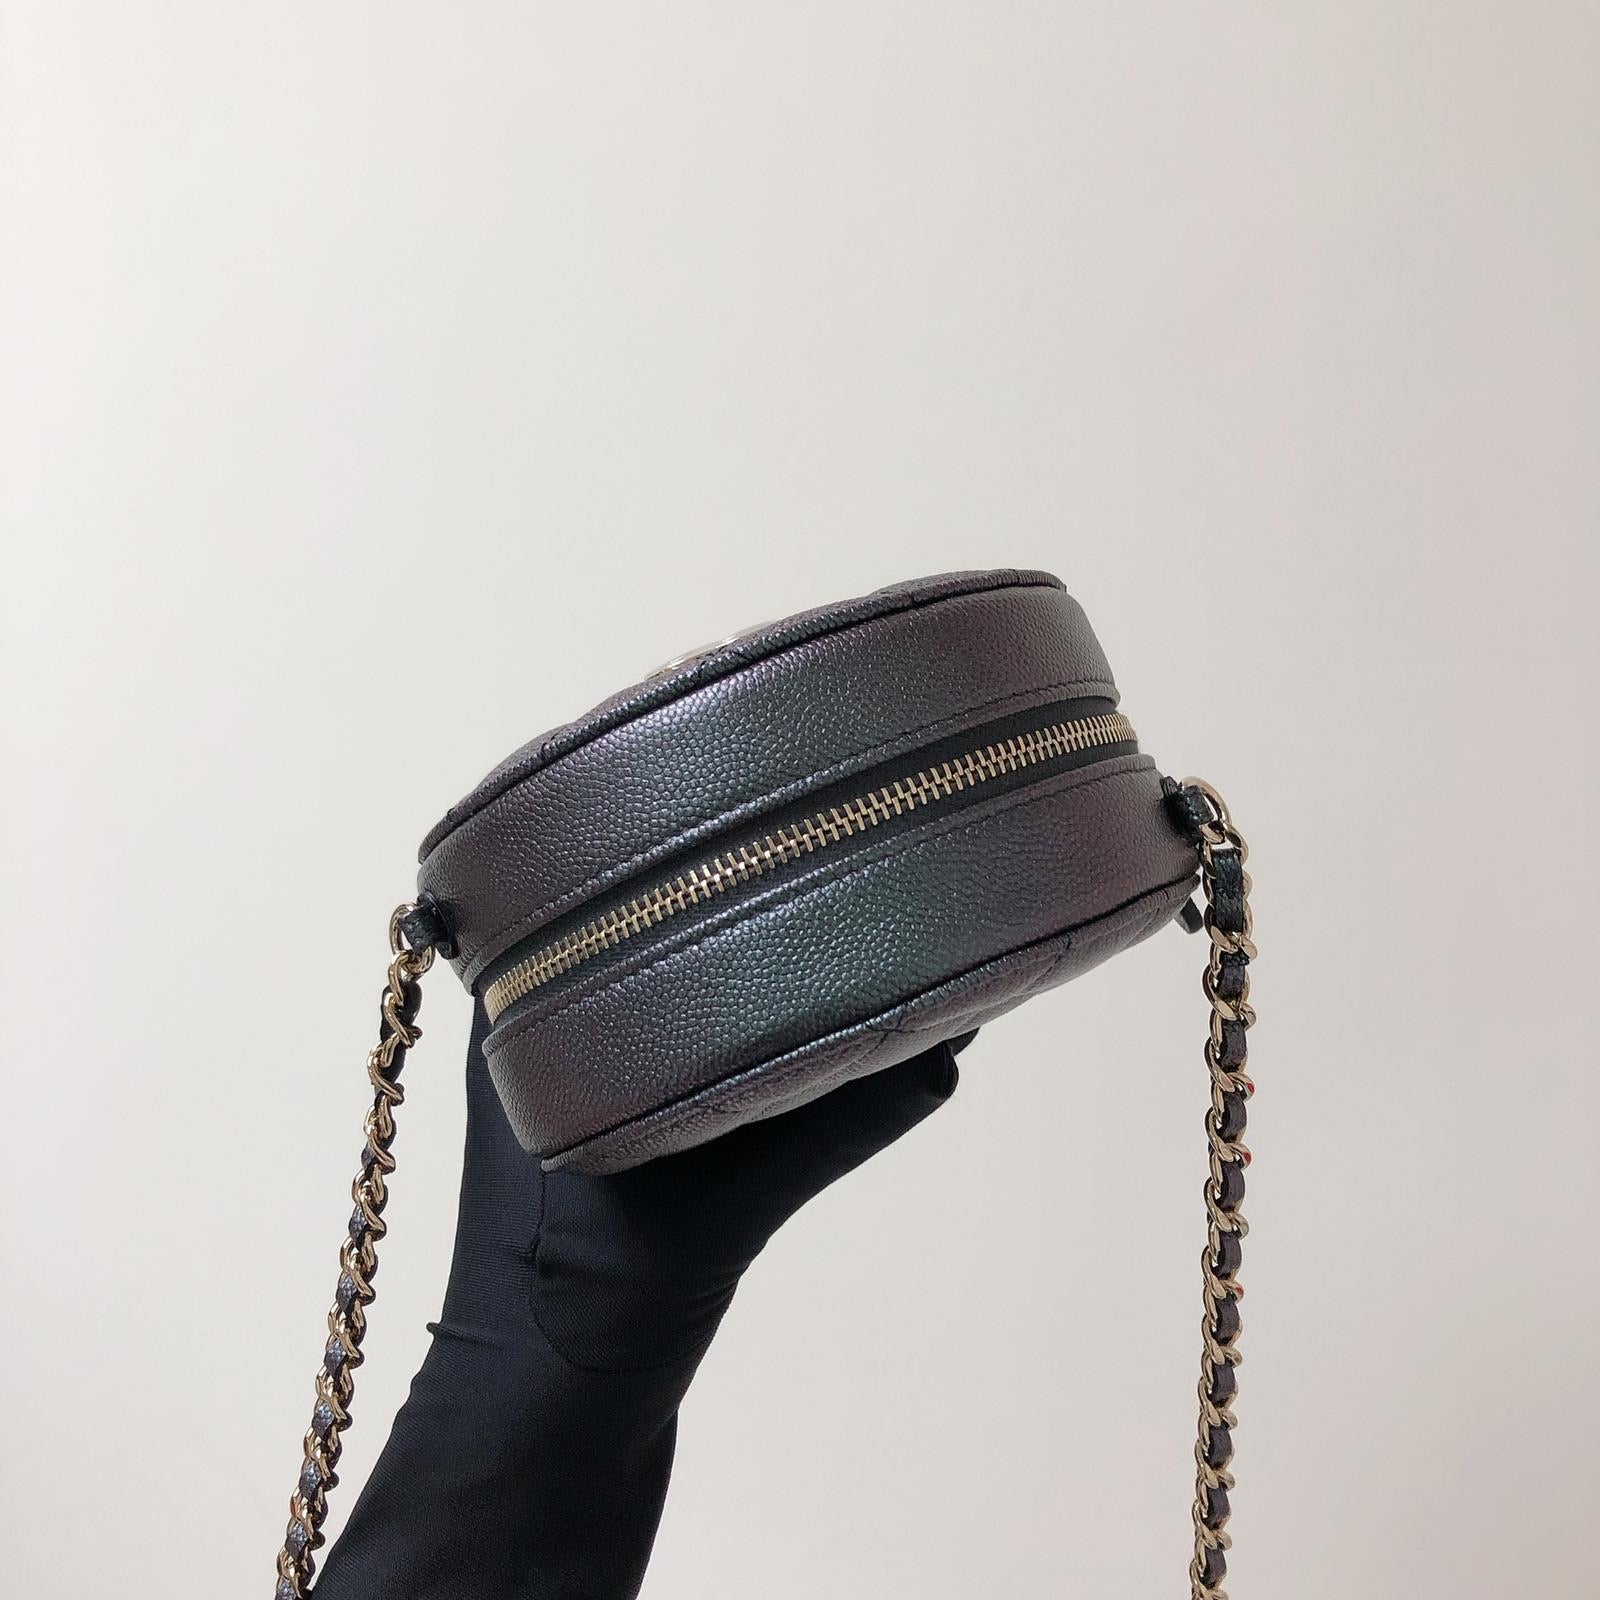 CHANEL Round Clutch with Chain